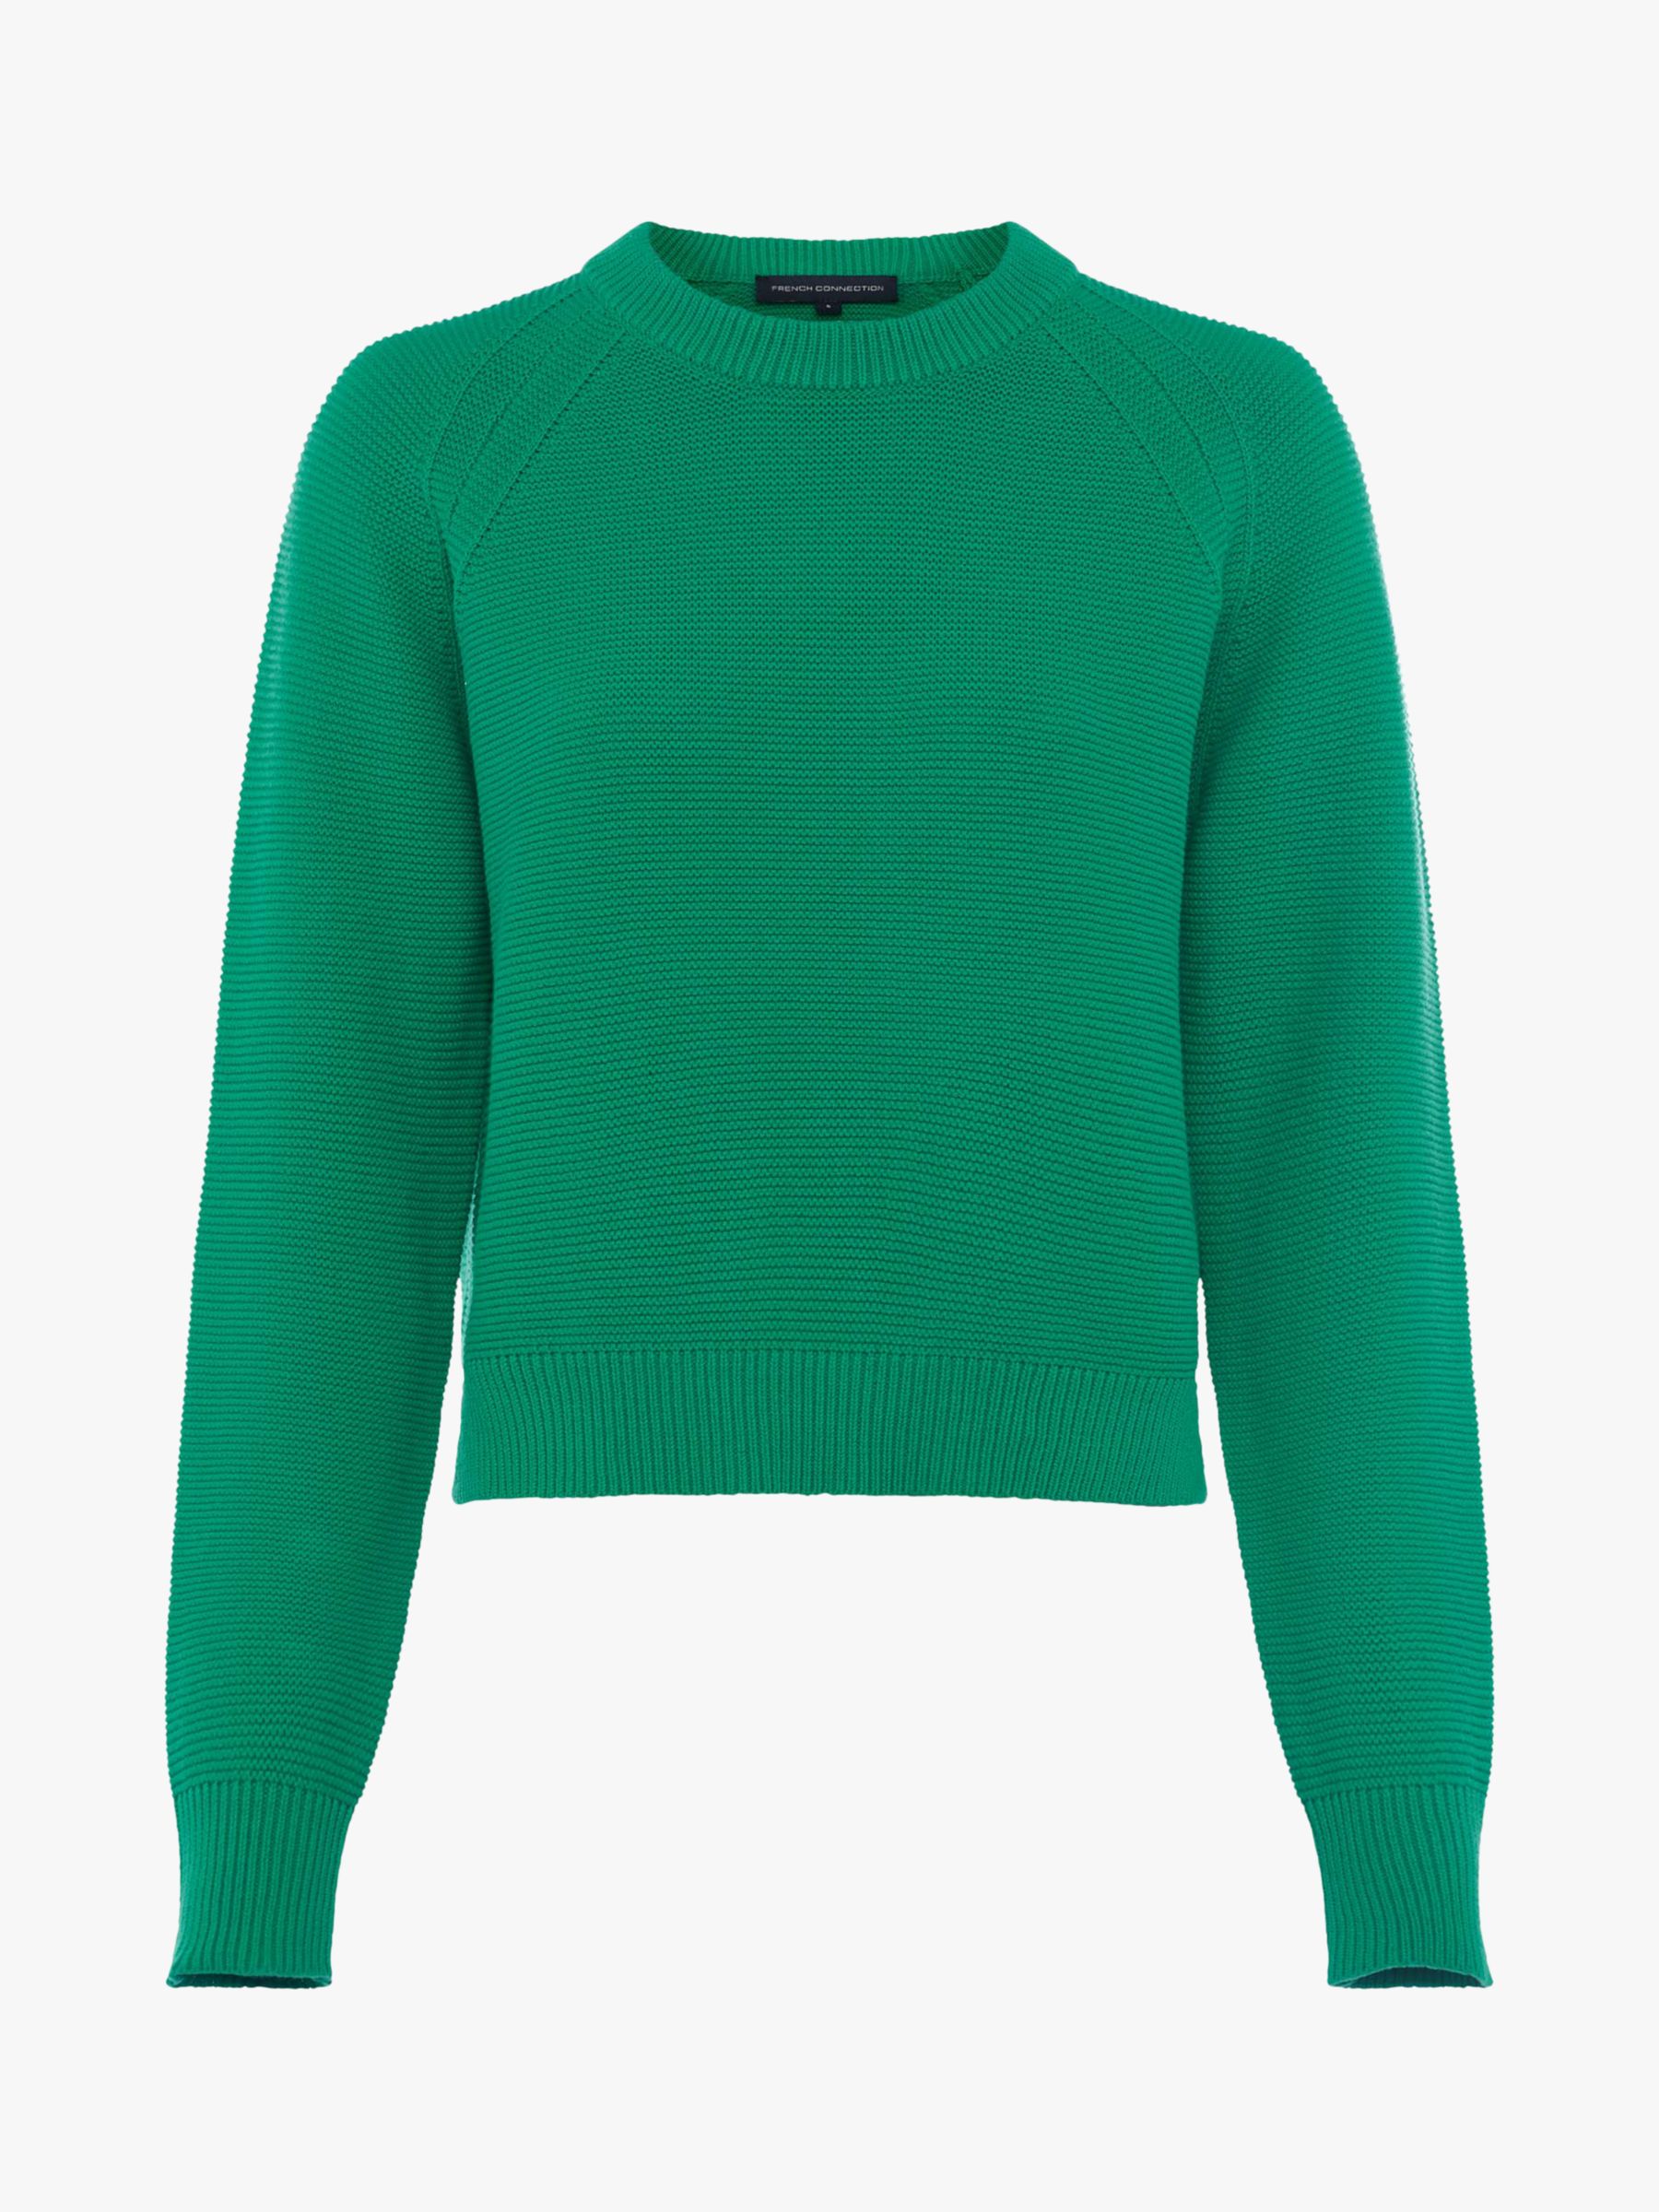 French Connection Lilly Mozart Jumper, Palm Green at John Lewis & Partners